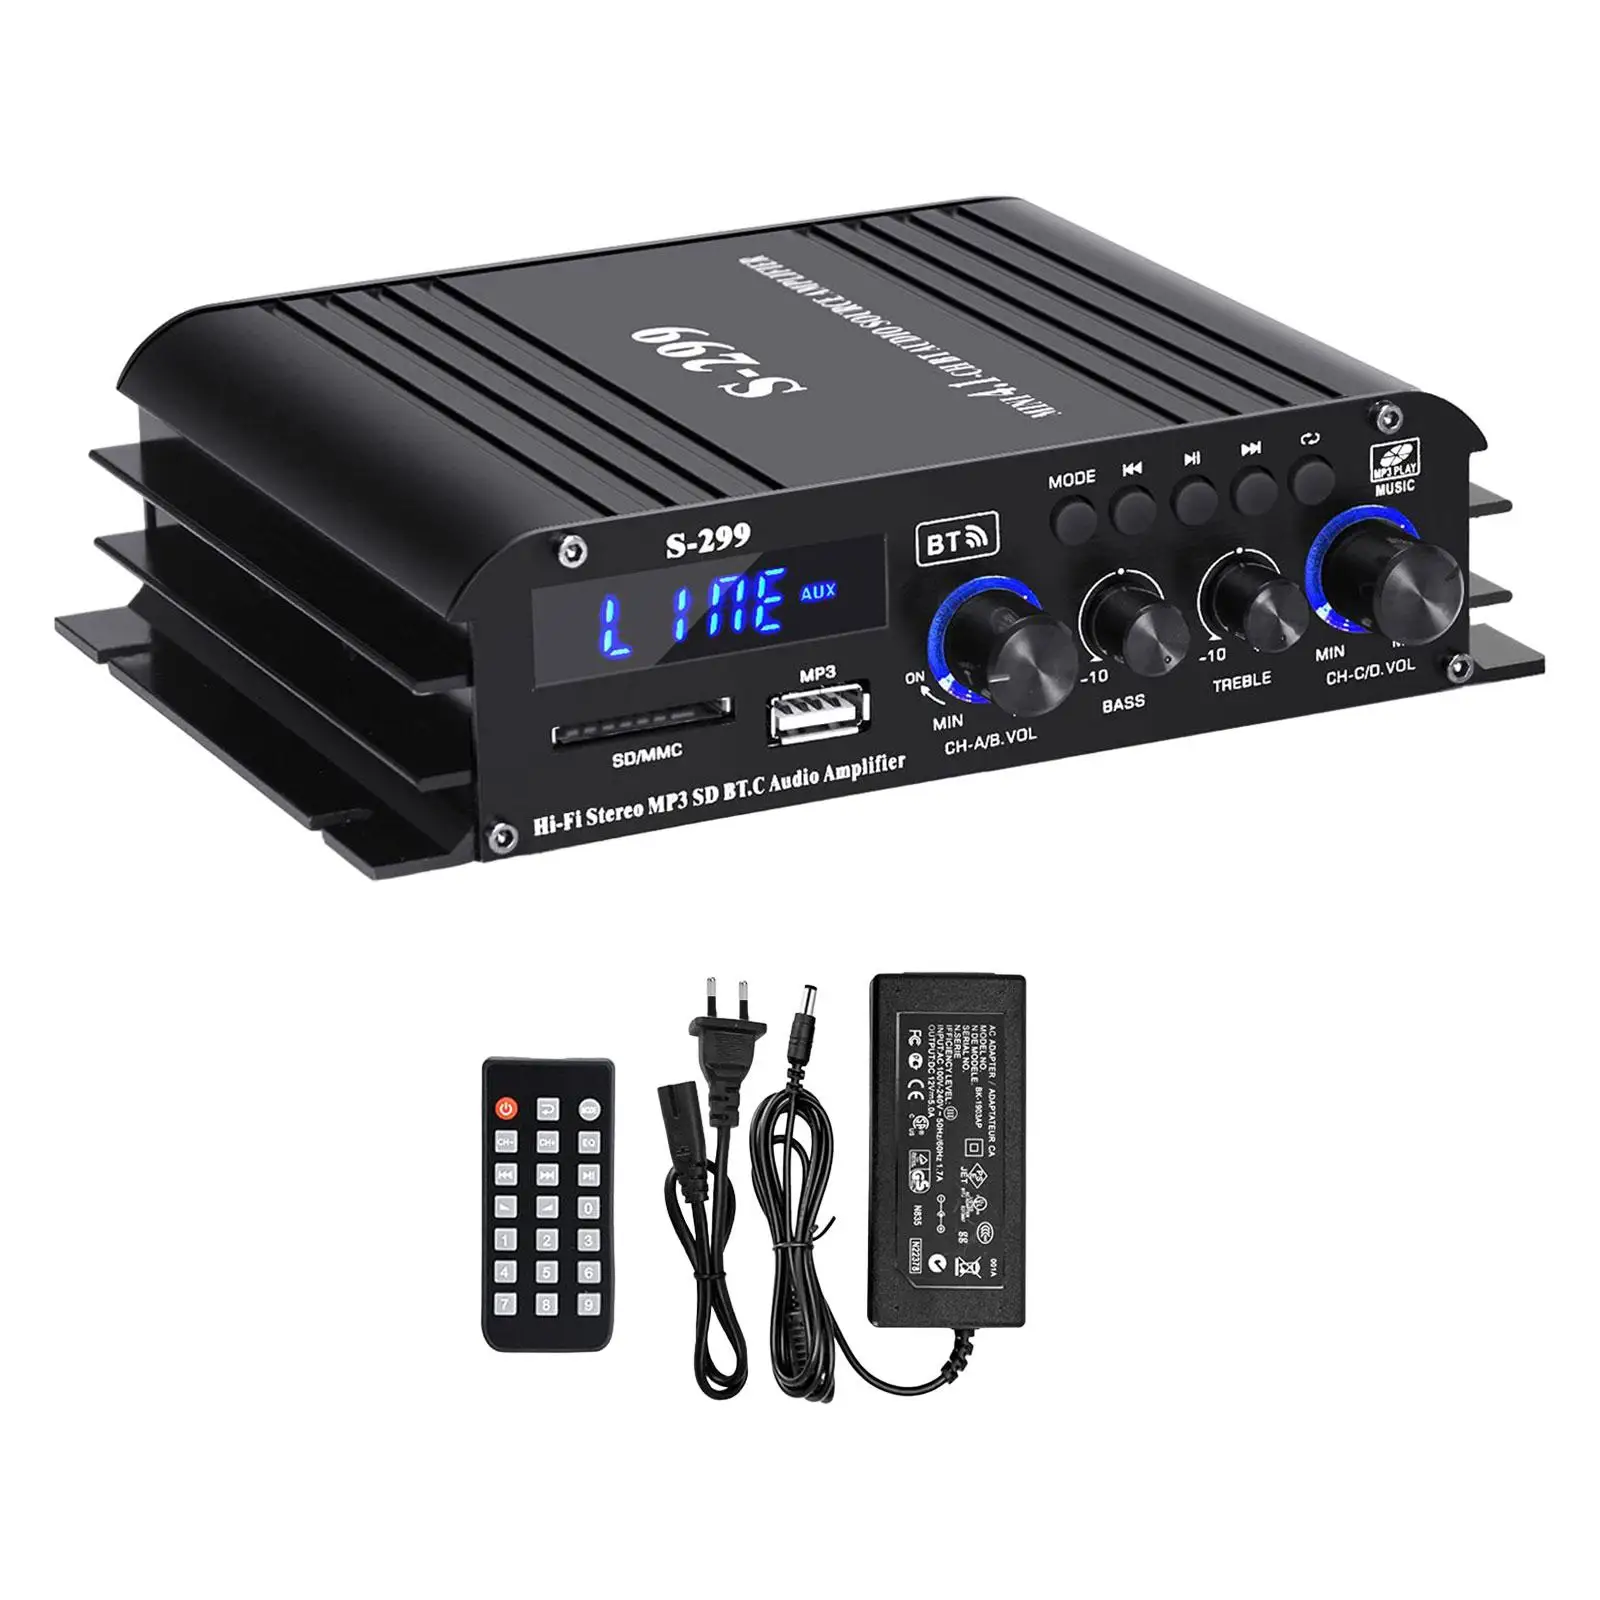 Digital Power Amplifier Portable USB AUX BT SD 4.1 Channel for Store Home Theater Mini HiFi Stereo Amp with Remote Control 40wx4